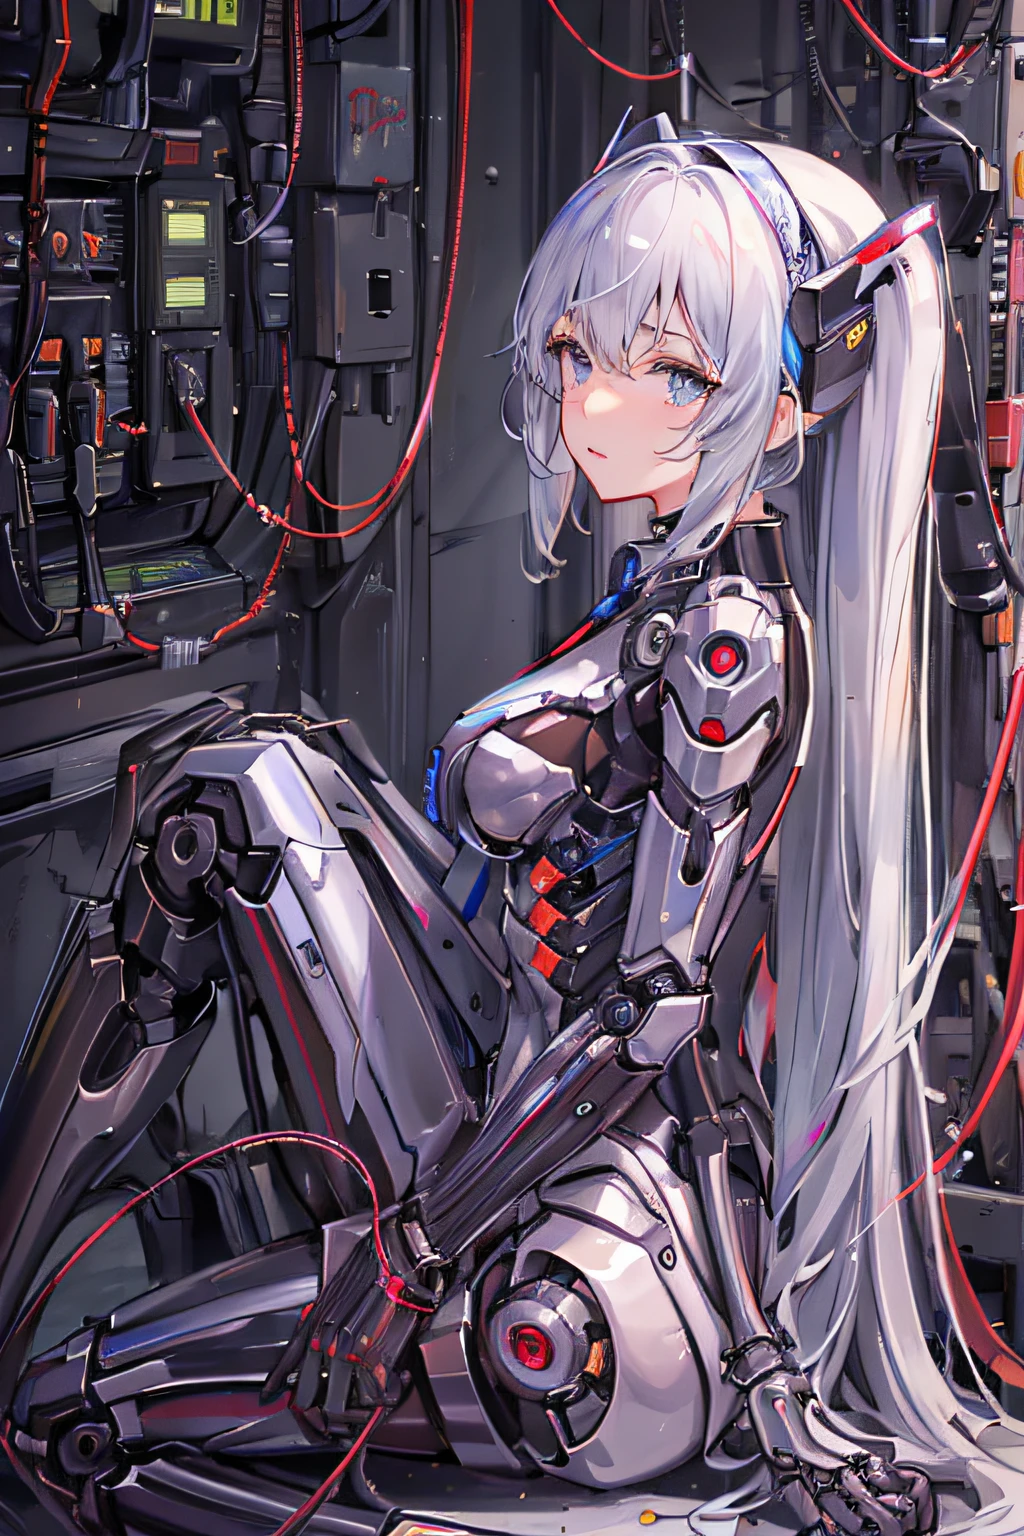 Anime девочка sitting on the ground with a robot in front of her, cyborg - девочка with silver hair, биомеханические сиськи, Cute cyborg девочка, Cyborg девочка, beautiful девочка cyborg, идеальная женщина-киборг в аниме, perfect android девочка, киборг - девушка, Аниме Киборг, beutiful white девочка cyborg, полностью роботизированный!! девочка, Cyberpunk anime девочка mecha